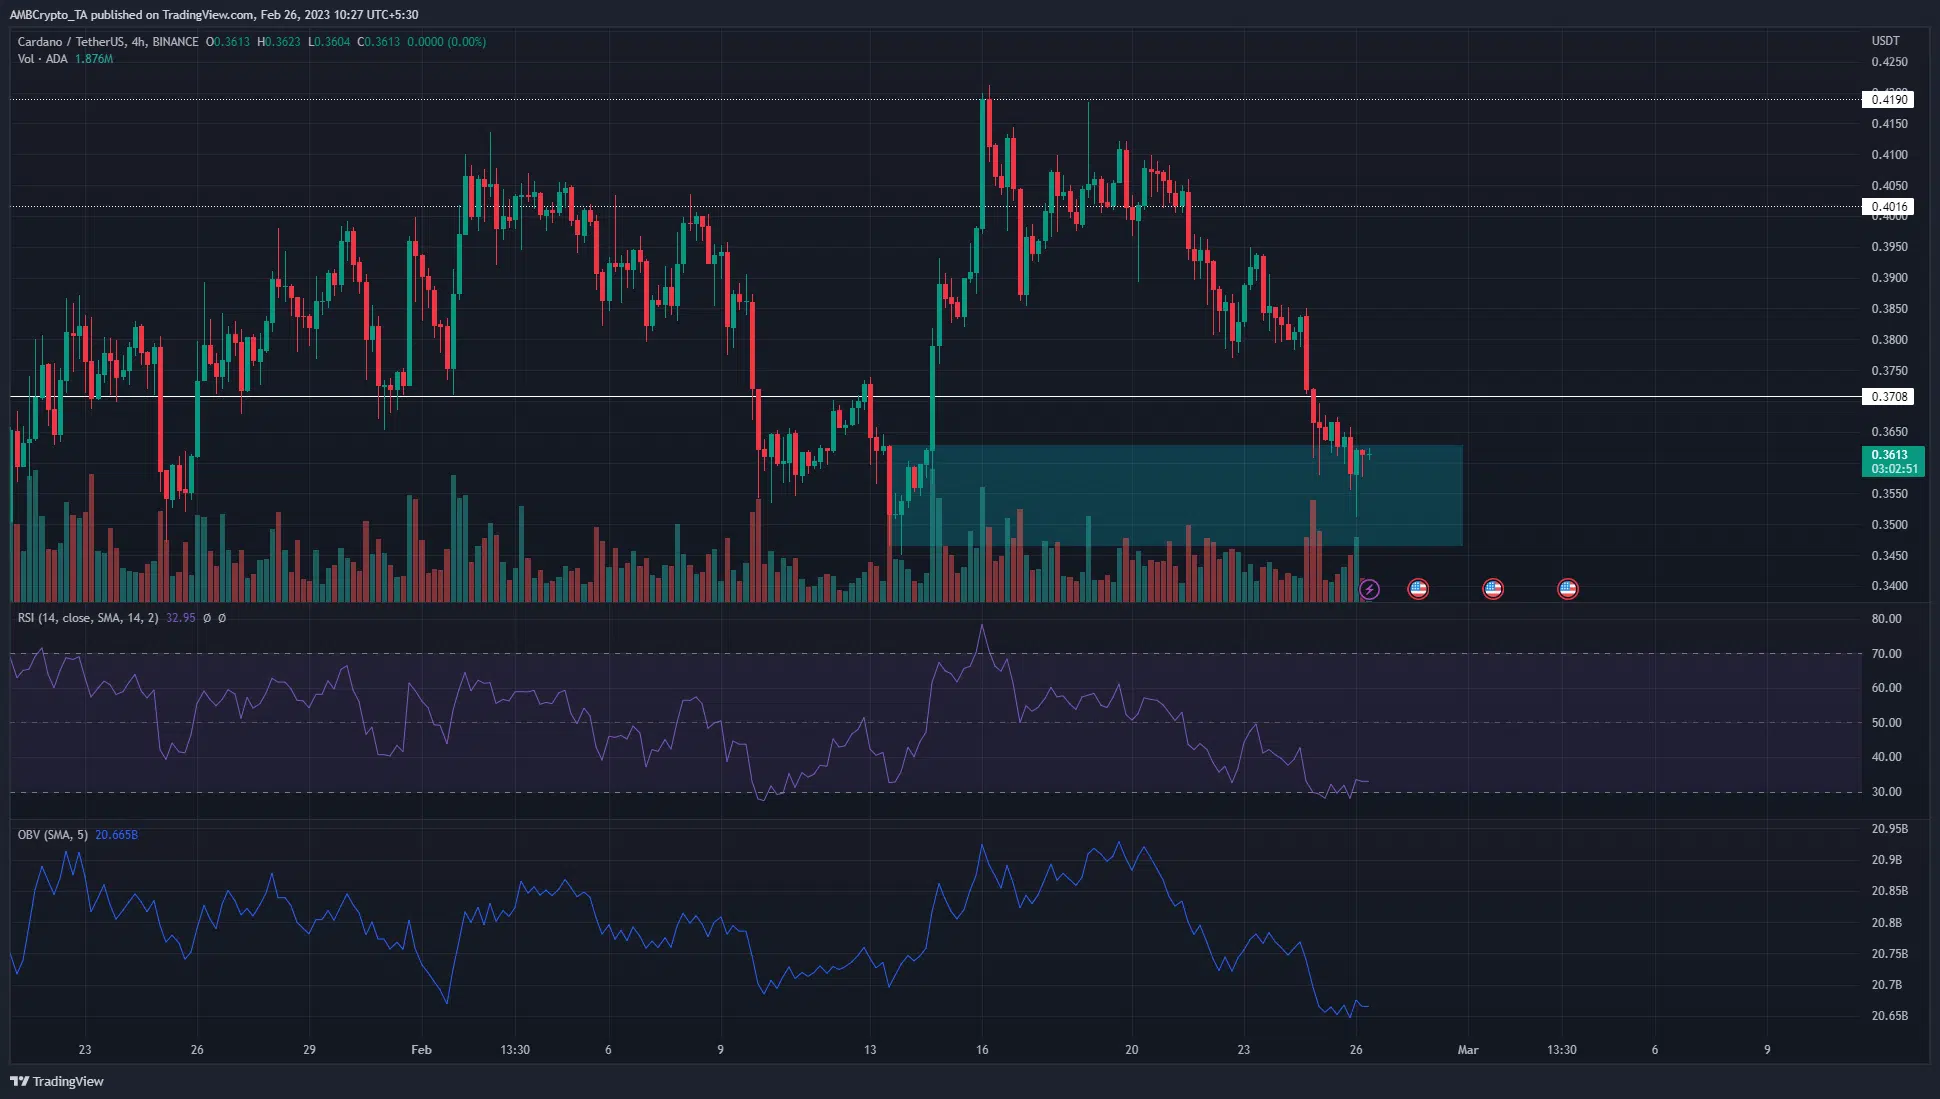 Cardano retraces into a zone of demand and a bullish reversal could occur